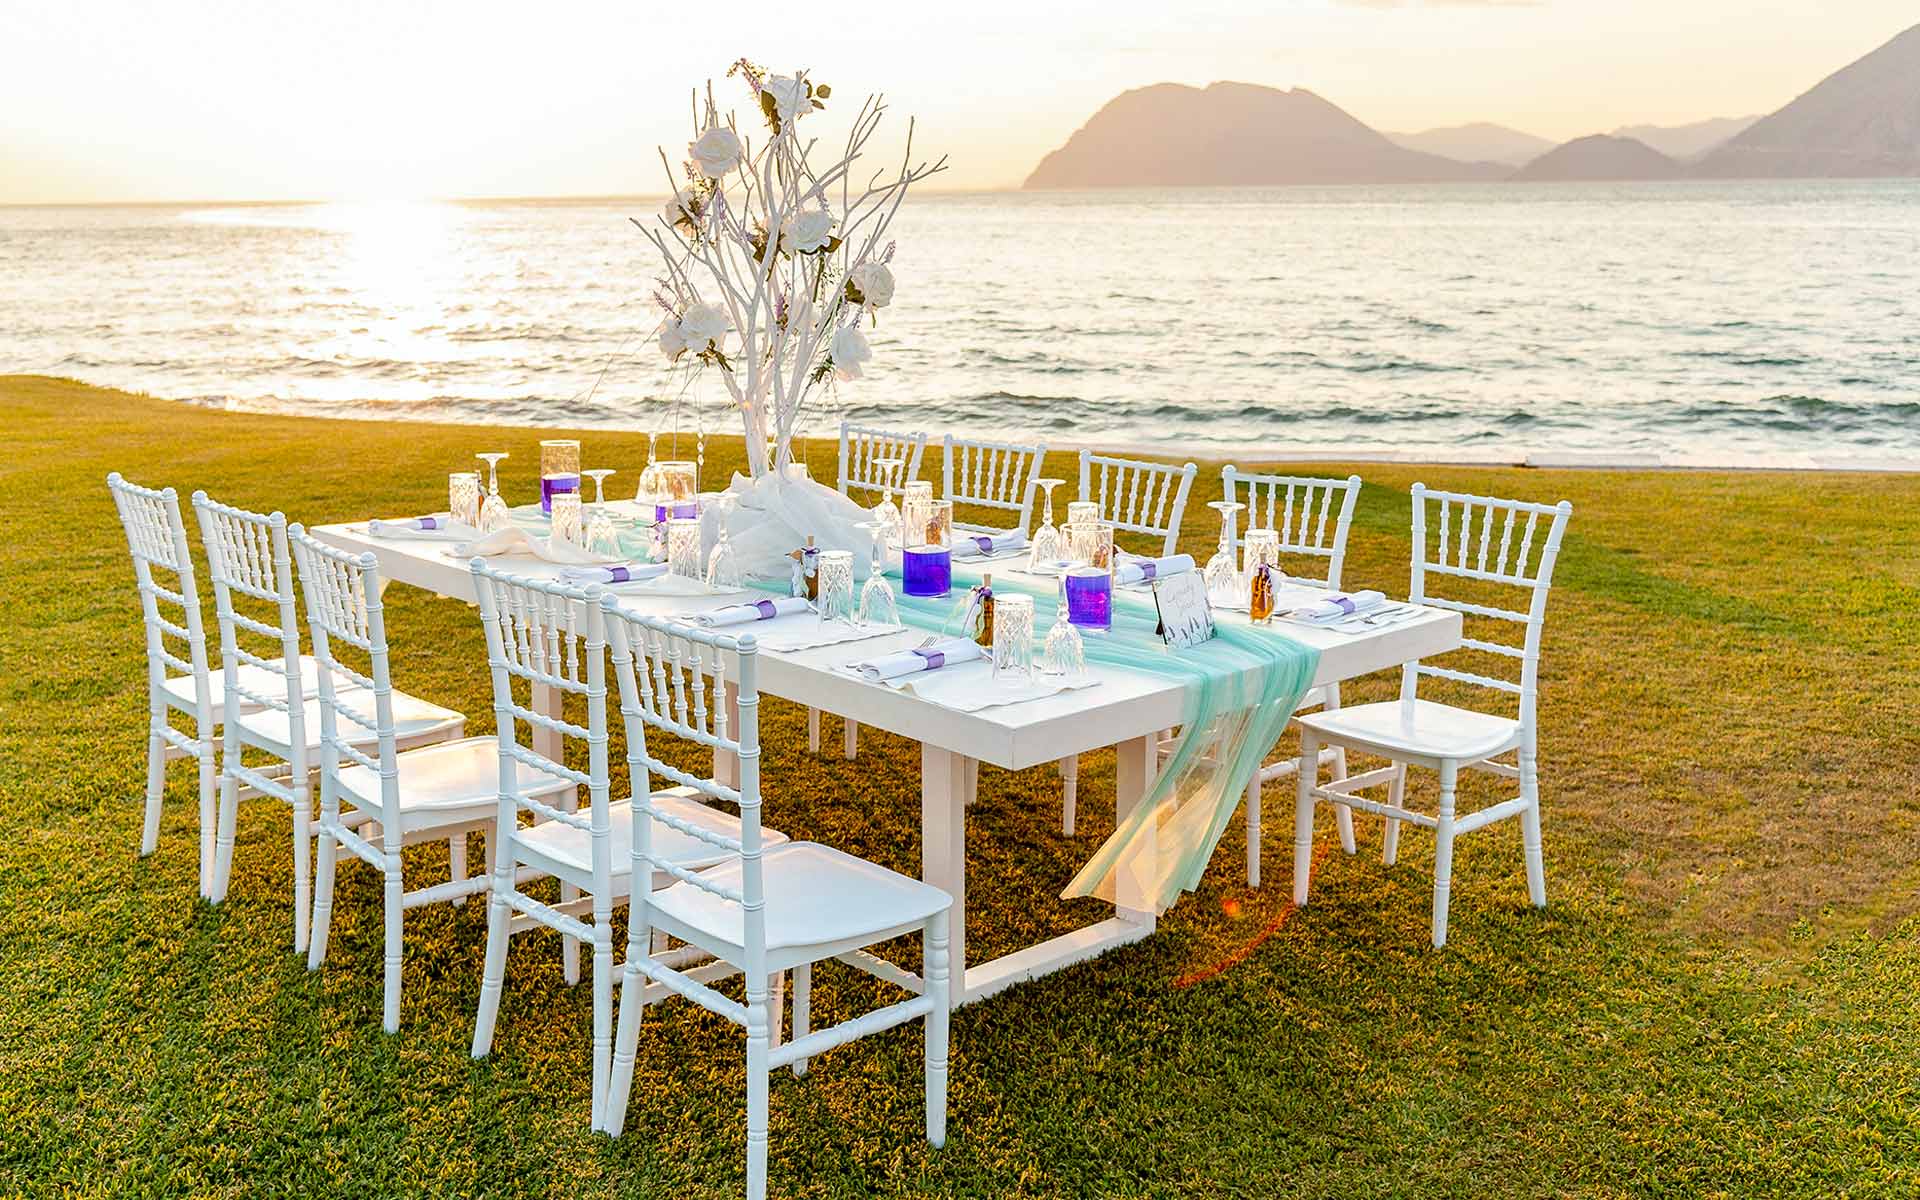 Sea side weddings are the epitome of summertime nuptials